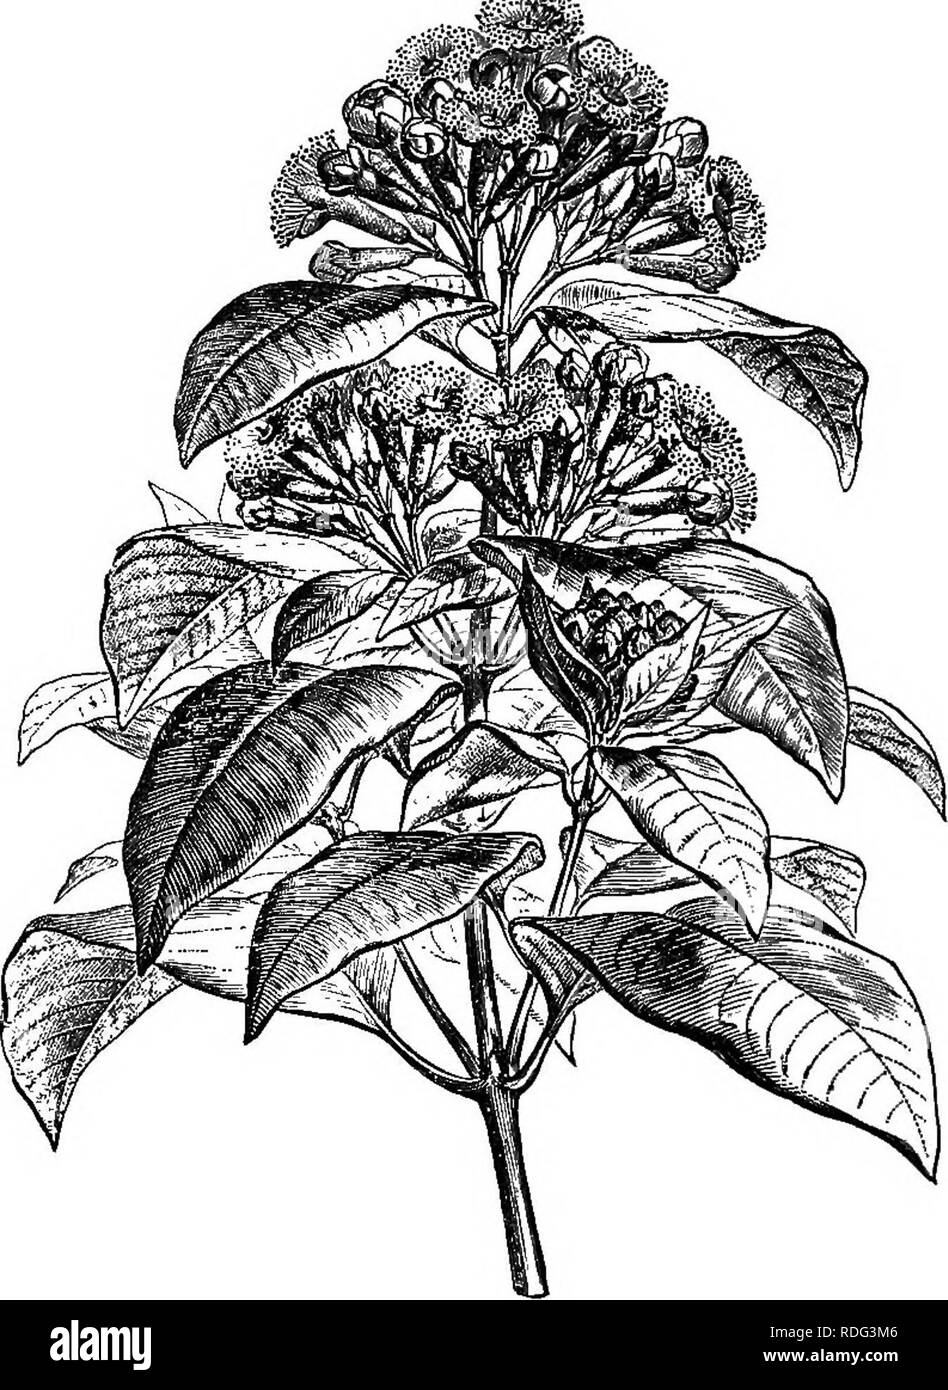 . The natural history of plants. Botany. Fig. 289. Long. sect, of fruit. Fig 288. Floriferous 'branch. donia, the calyx of which is soniewhat different as regards alter- native prefloration. II. LEPTOSPEEM SEEIES. In the genus Leptospermum ' (fig. 290-293), which has given its name to quite a group of Myrtacece with dry fruit, ^ the flowers are Acioalyptus has ovarian cells (complete or in- complete) containing numerous anatropous ovules, arranged on vertical placentse; and Filioealyx, orthotropous and descending ovules, inserted in each cell on a placenta nearly apical. 1 FoRST. Char. Gen. 71 Stock Photo